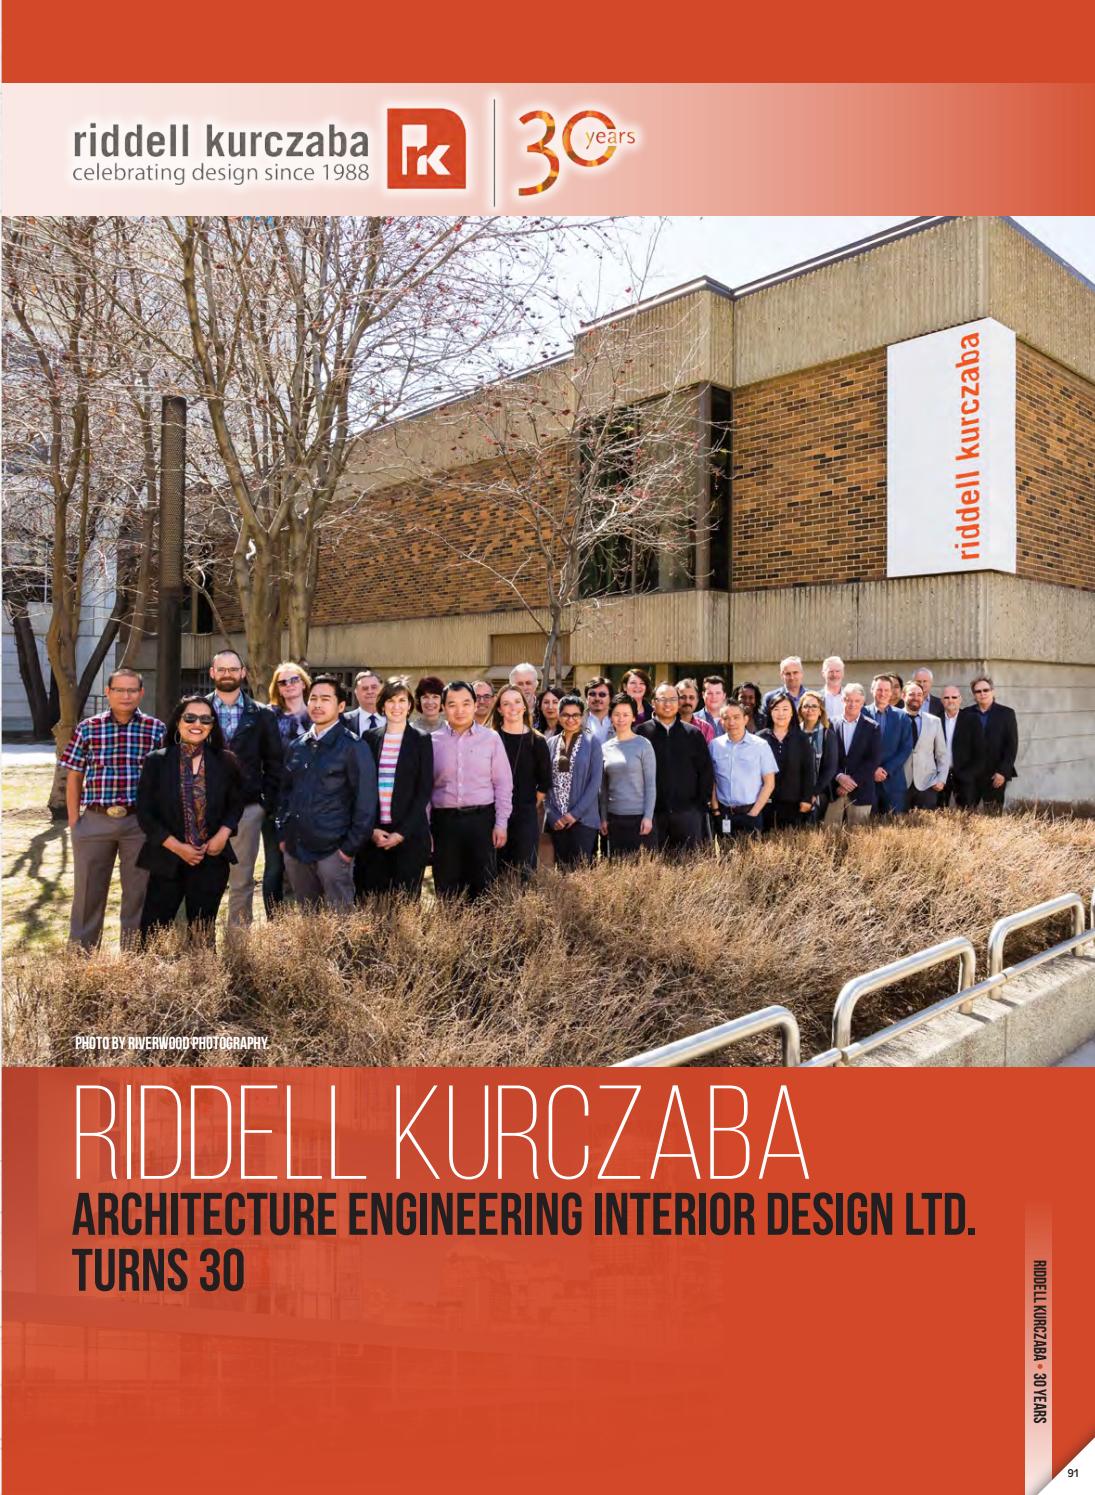 Business in Calgary Magazine - Business Profile for Riddell Kurczaba Architecture